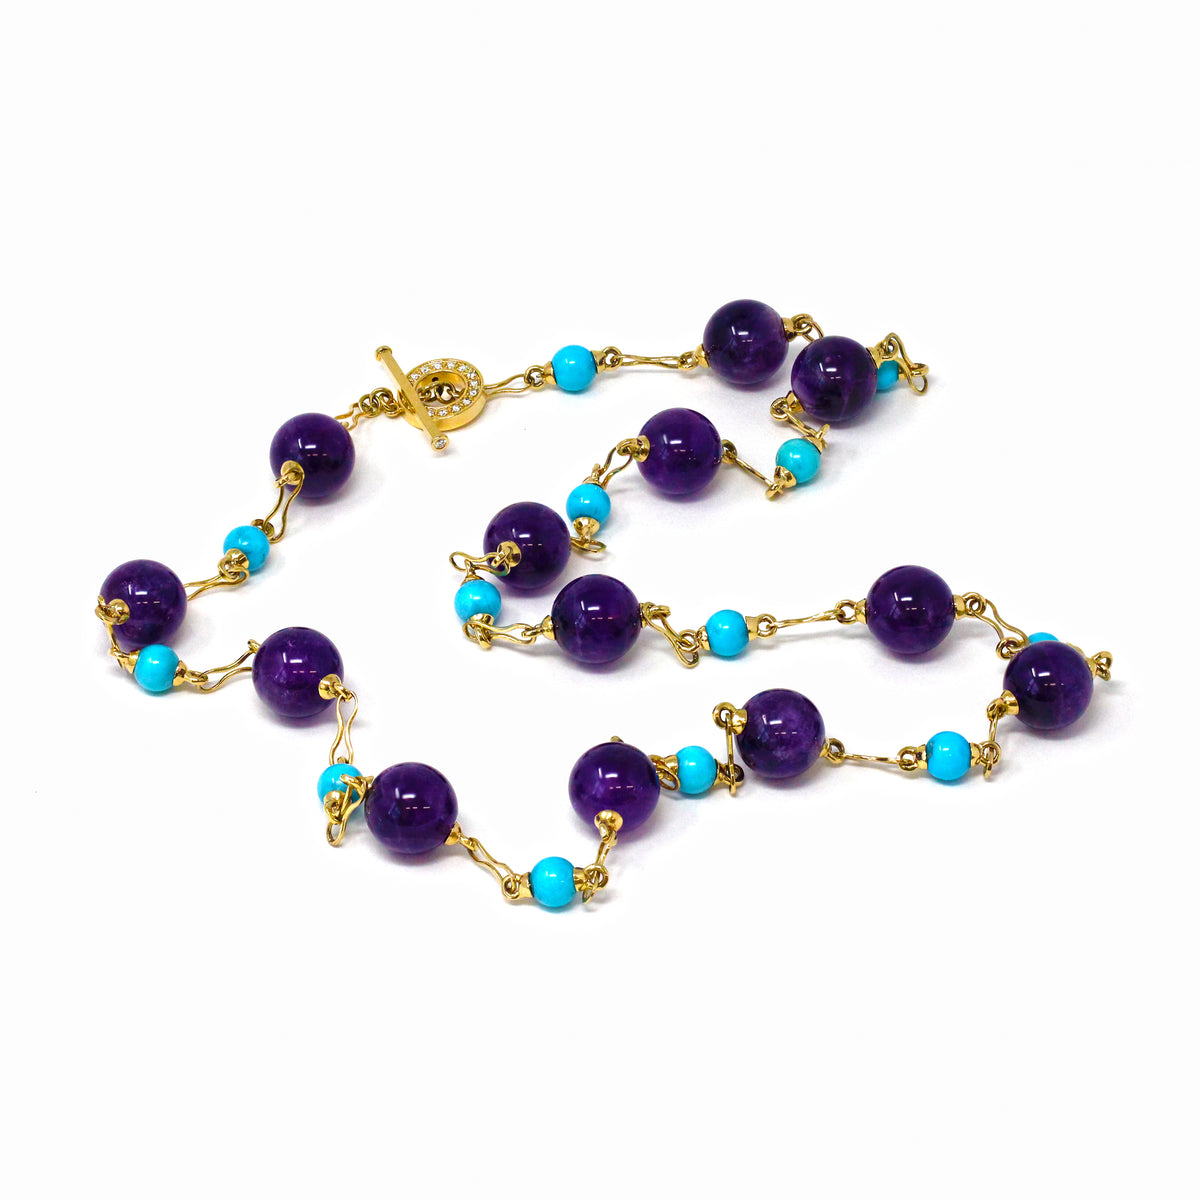 Signed Rosaria Varra Turquoise and Amethyst Beads Station Necklace 18 Karat